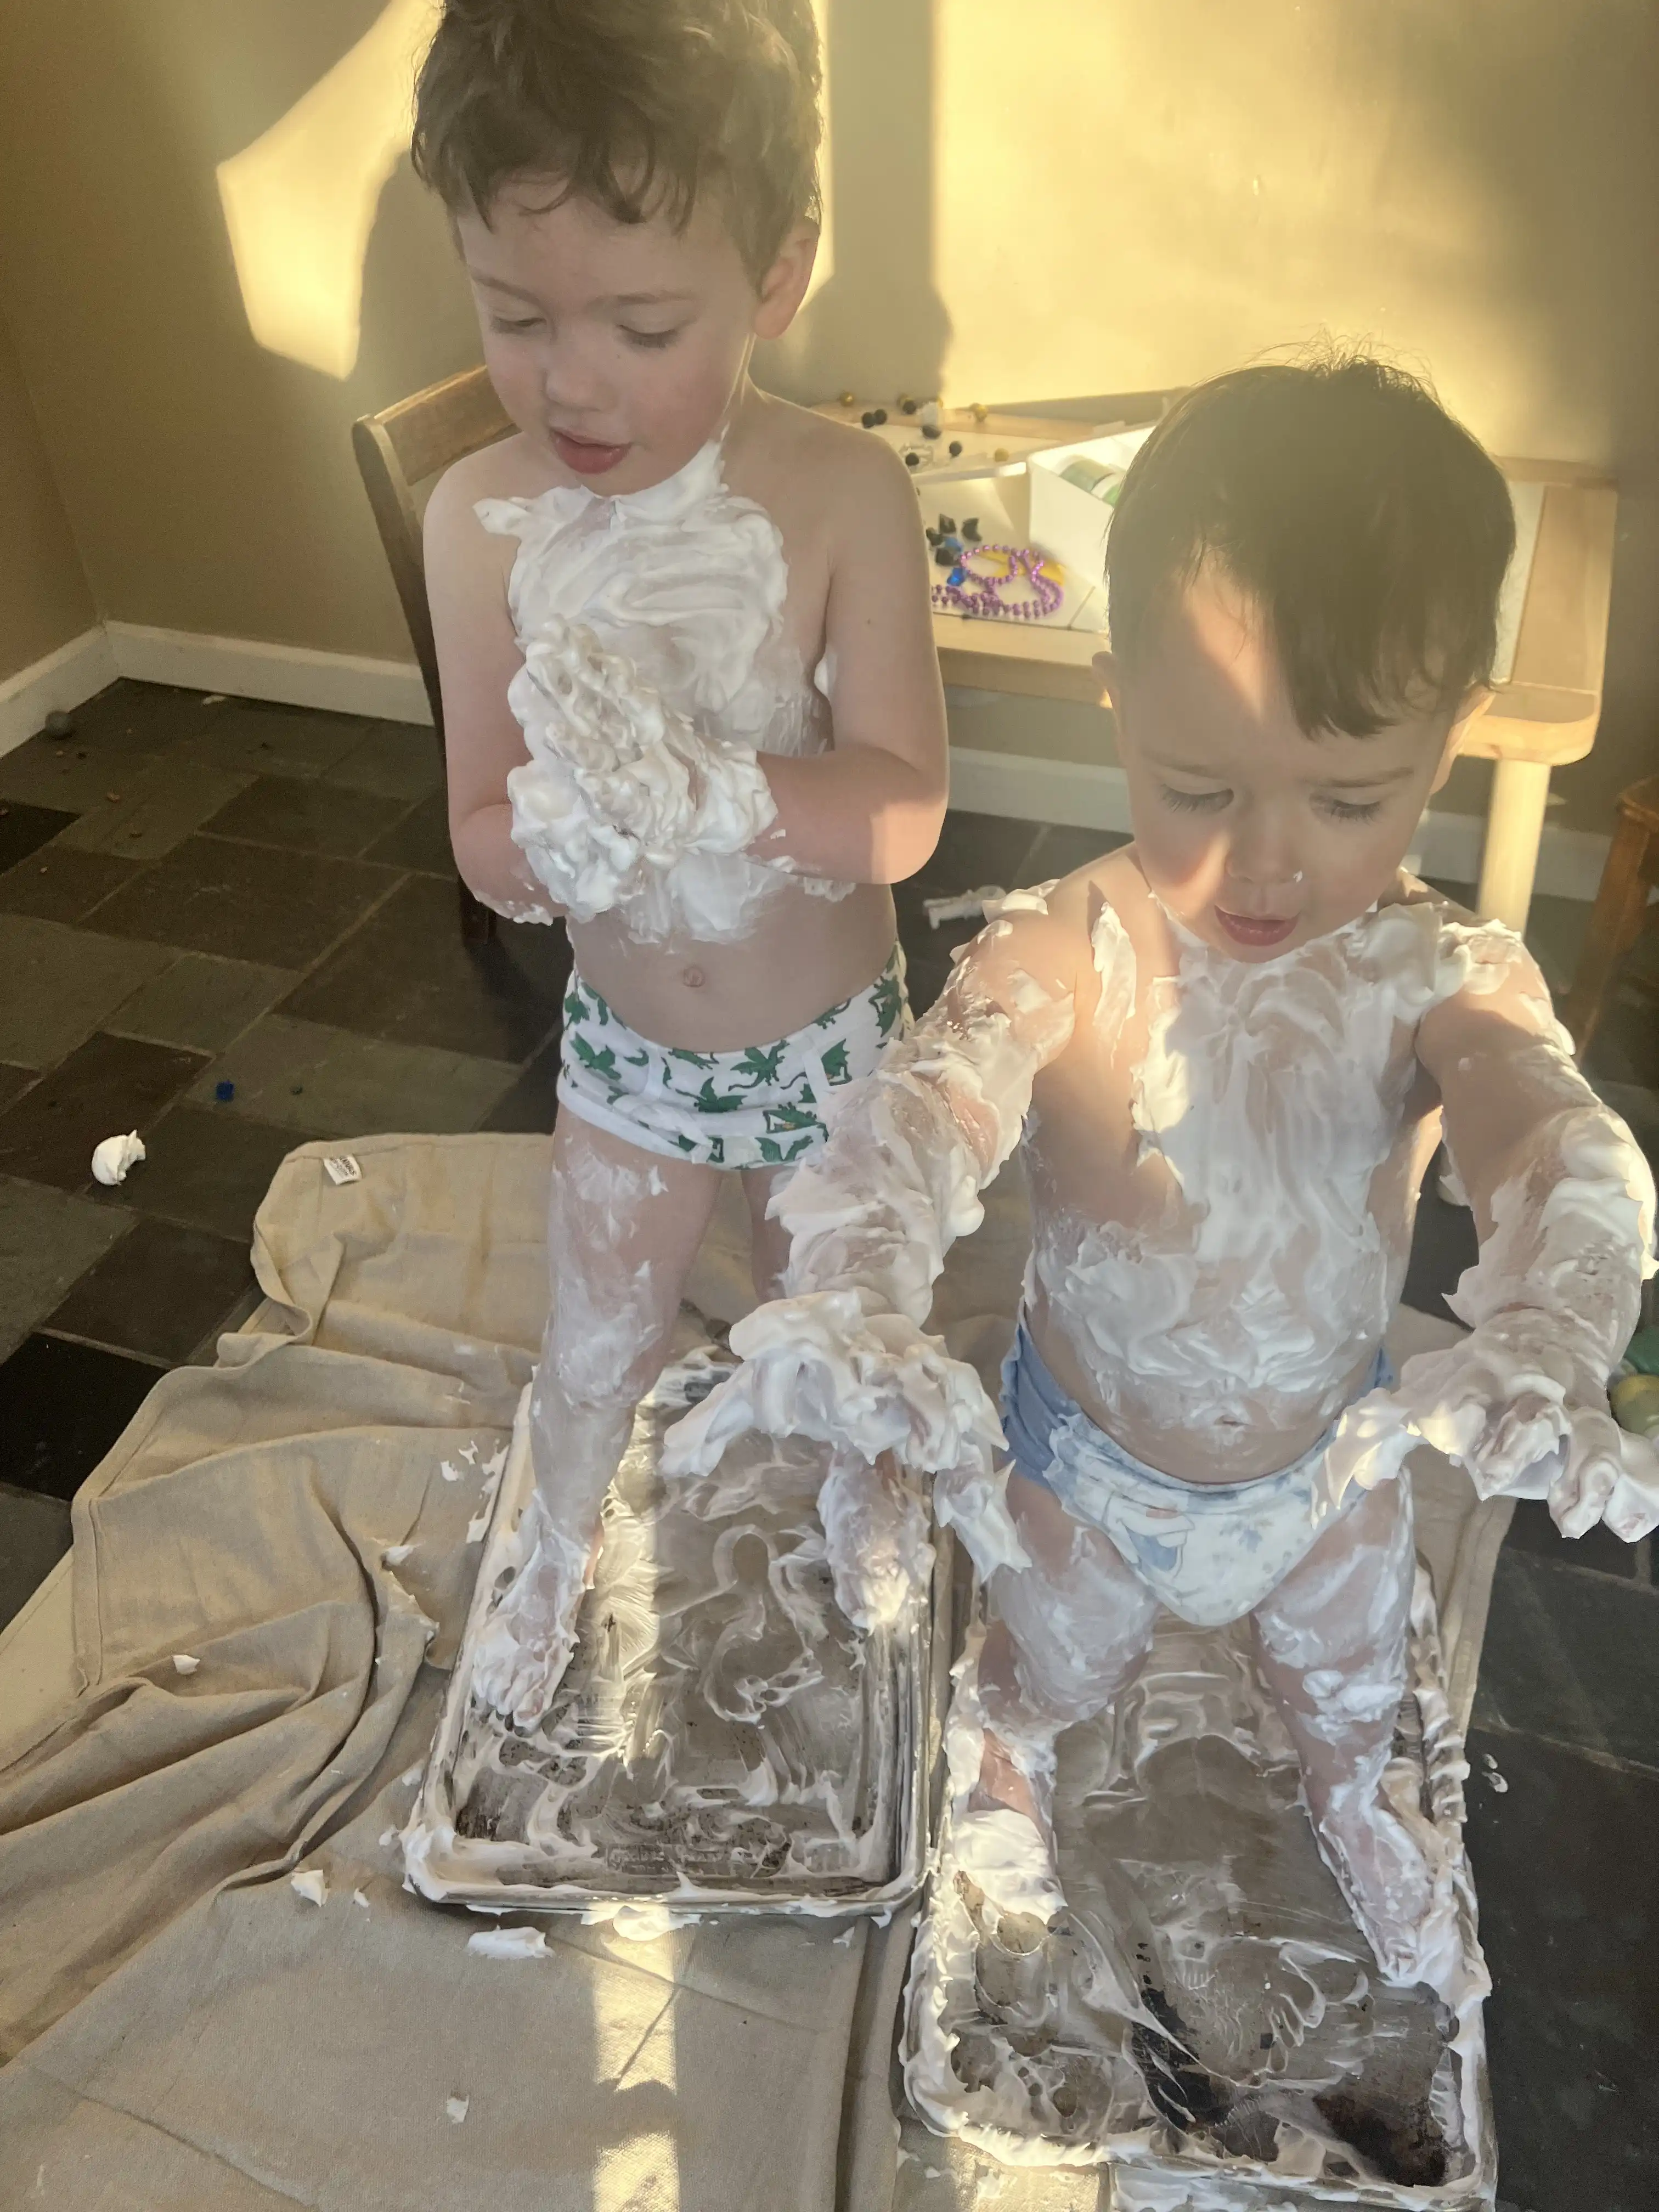 Graham and Royal with their hands raised, covered in shaving cream.